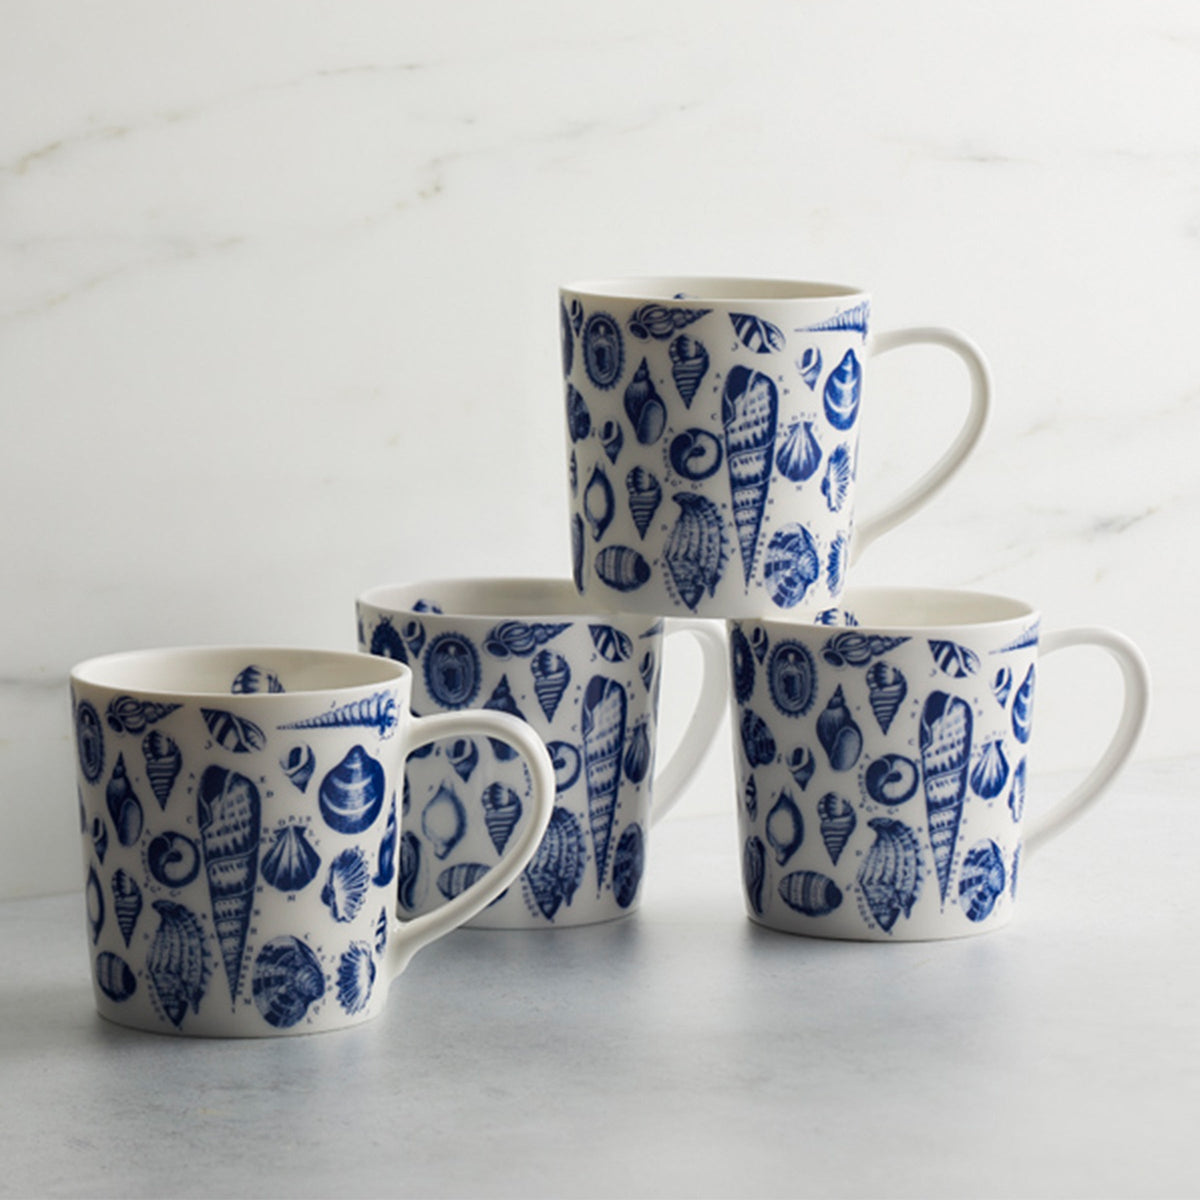 Four Mixed Shells Mugs Blue by Caskata Artisanal Home with blue and white designs on them.